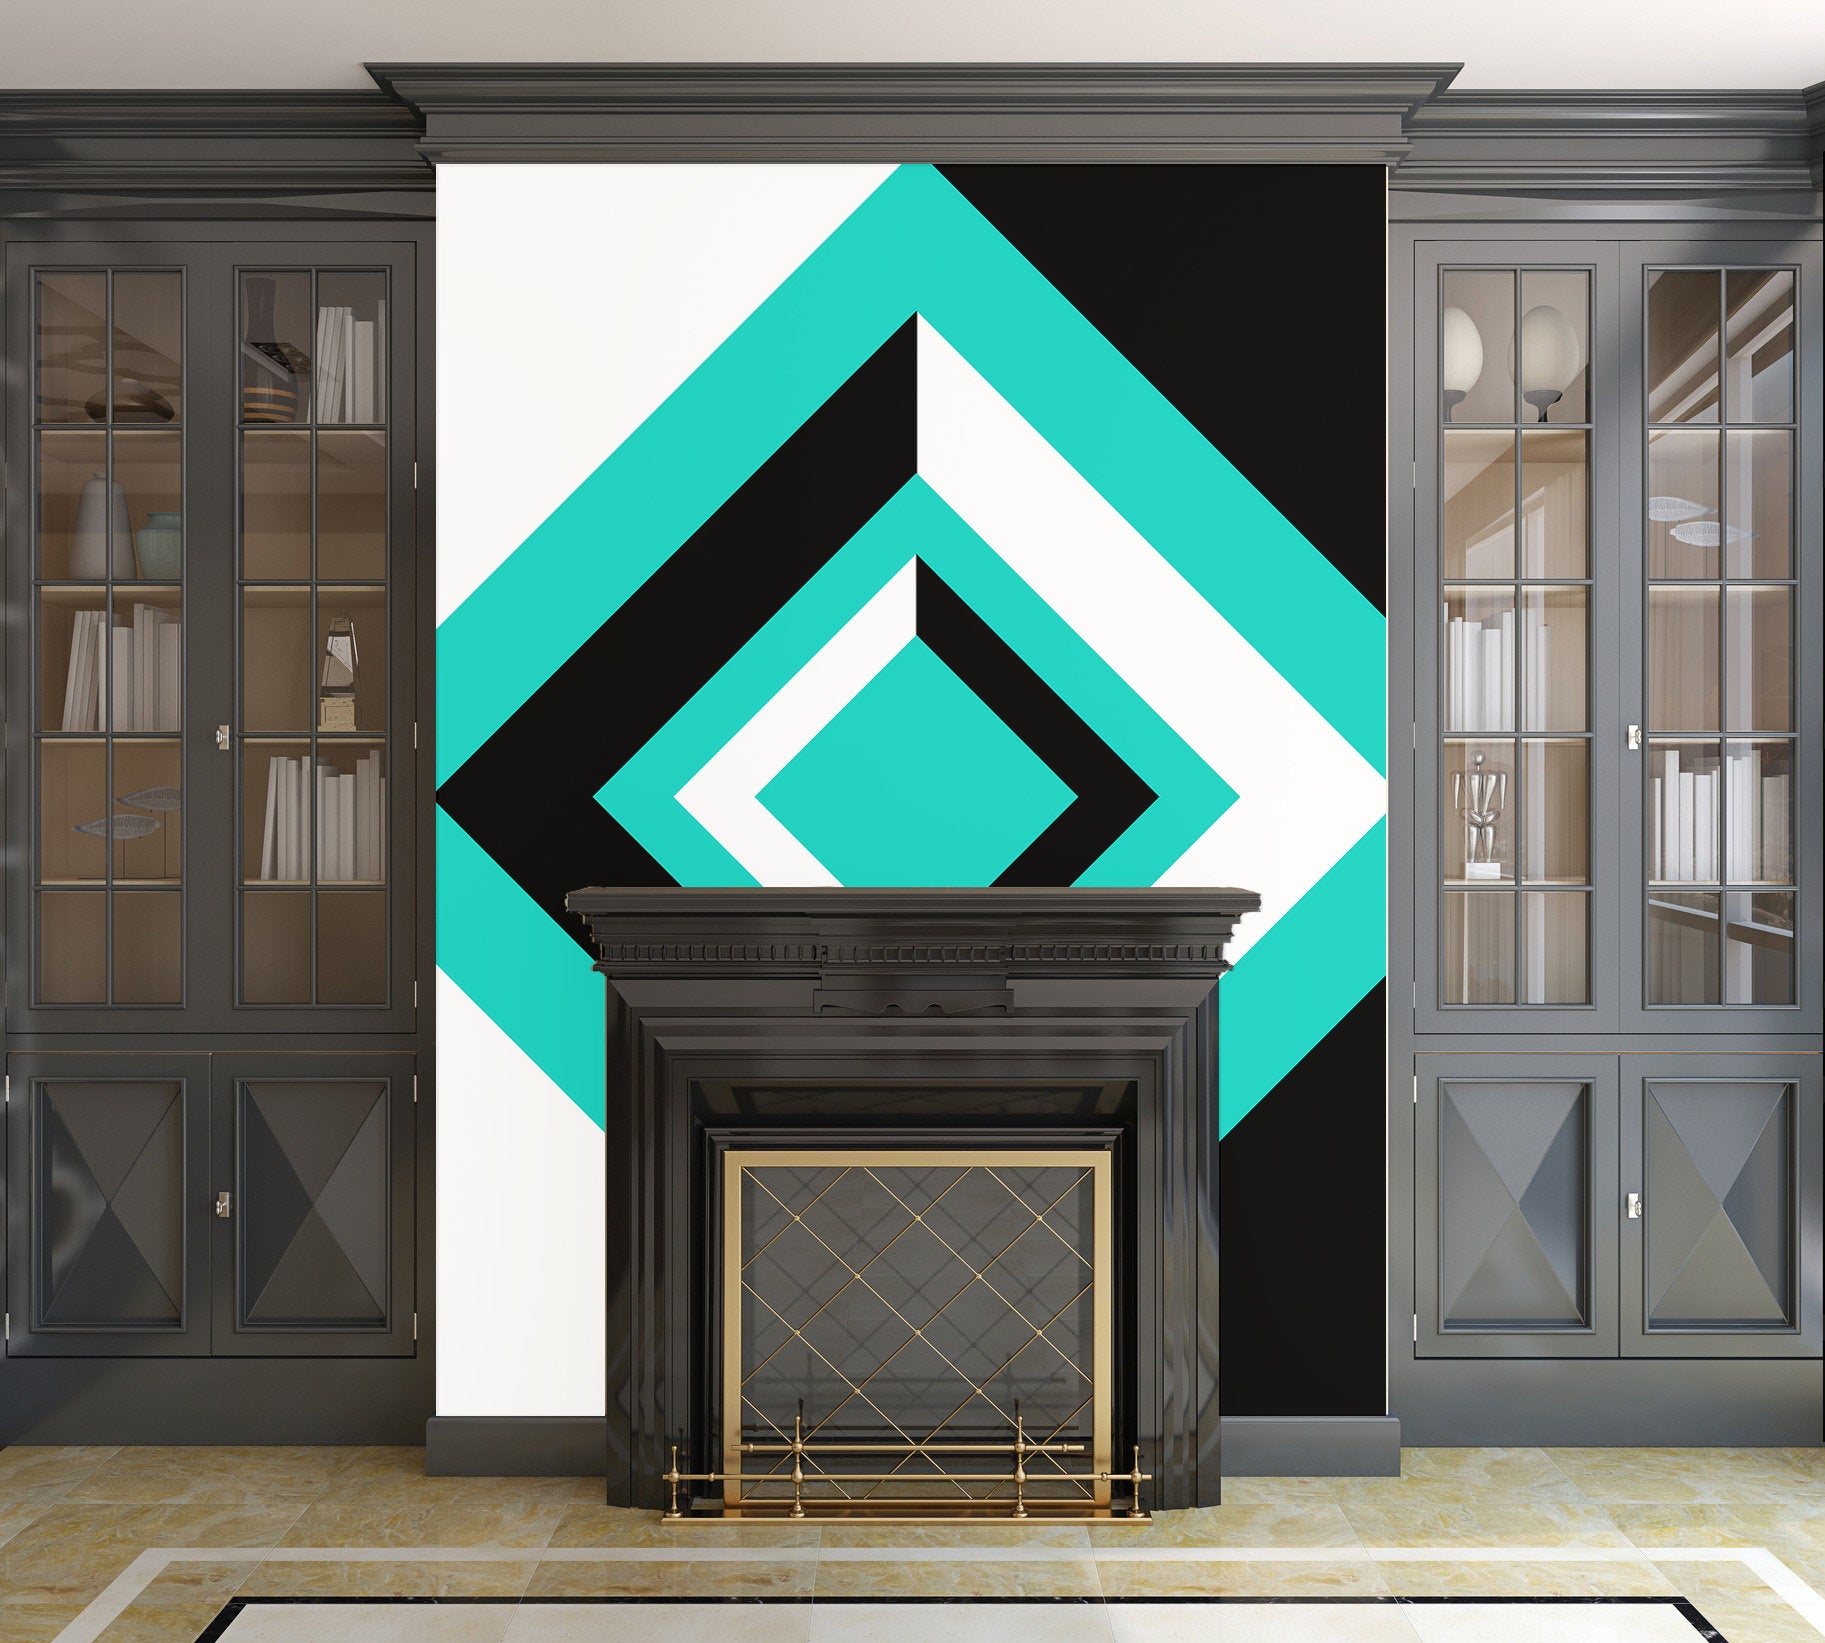 Teal, Black, and White Geometric Shapes - Peel and Stick Removable Wallpaper Full Size Wall Mural  - PIPAFINEART